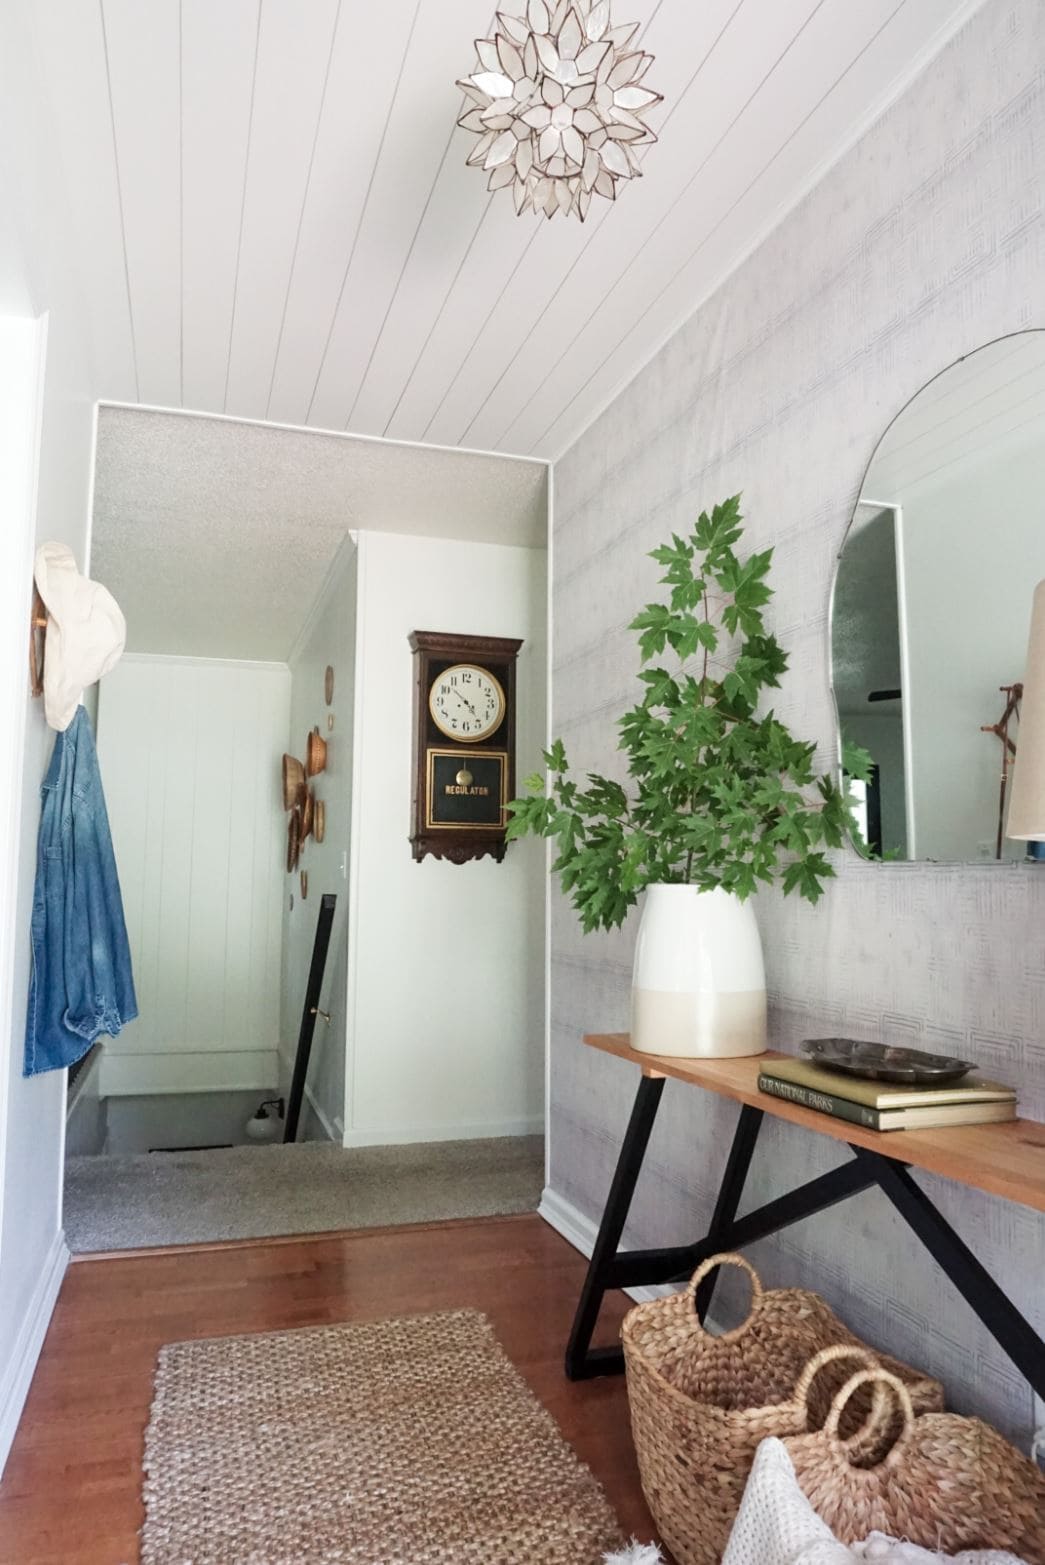 A white shiplap ceiling in a hallway.